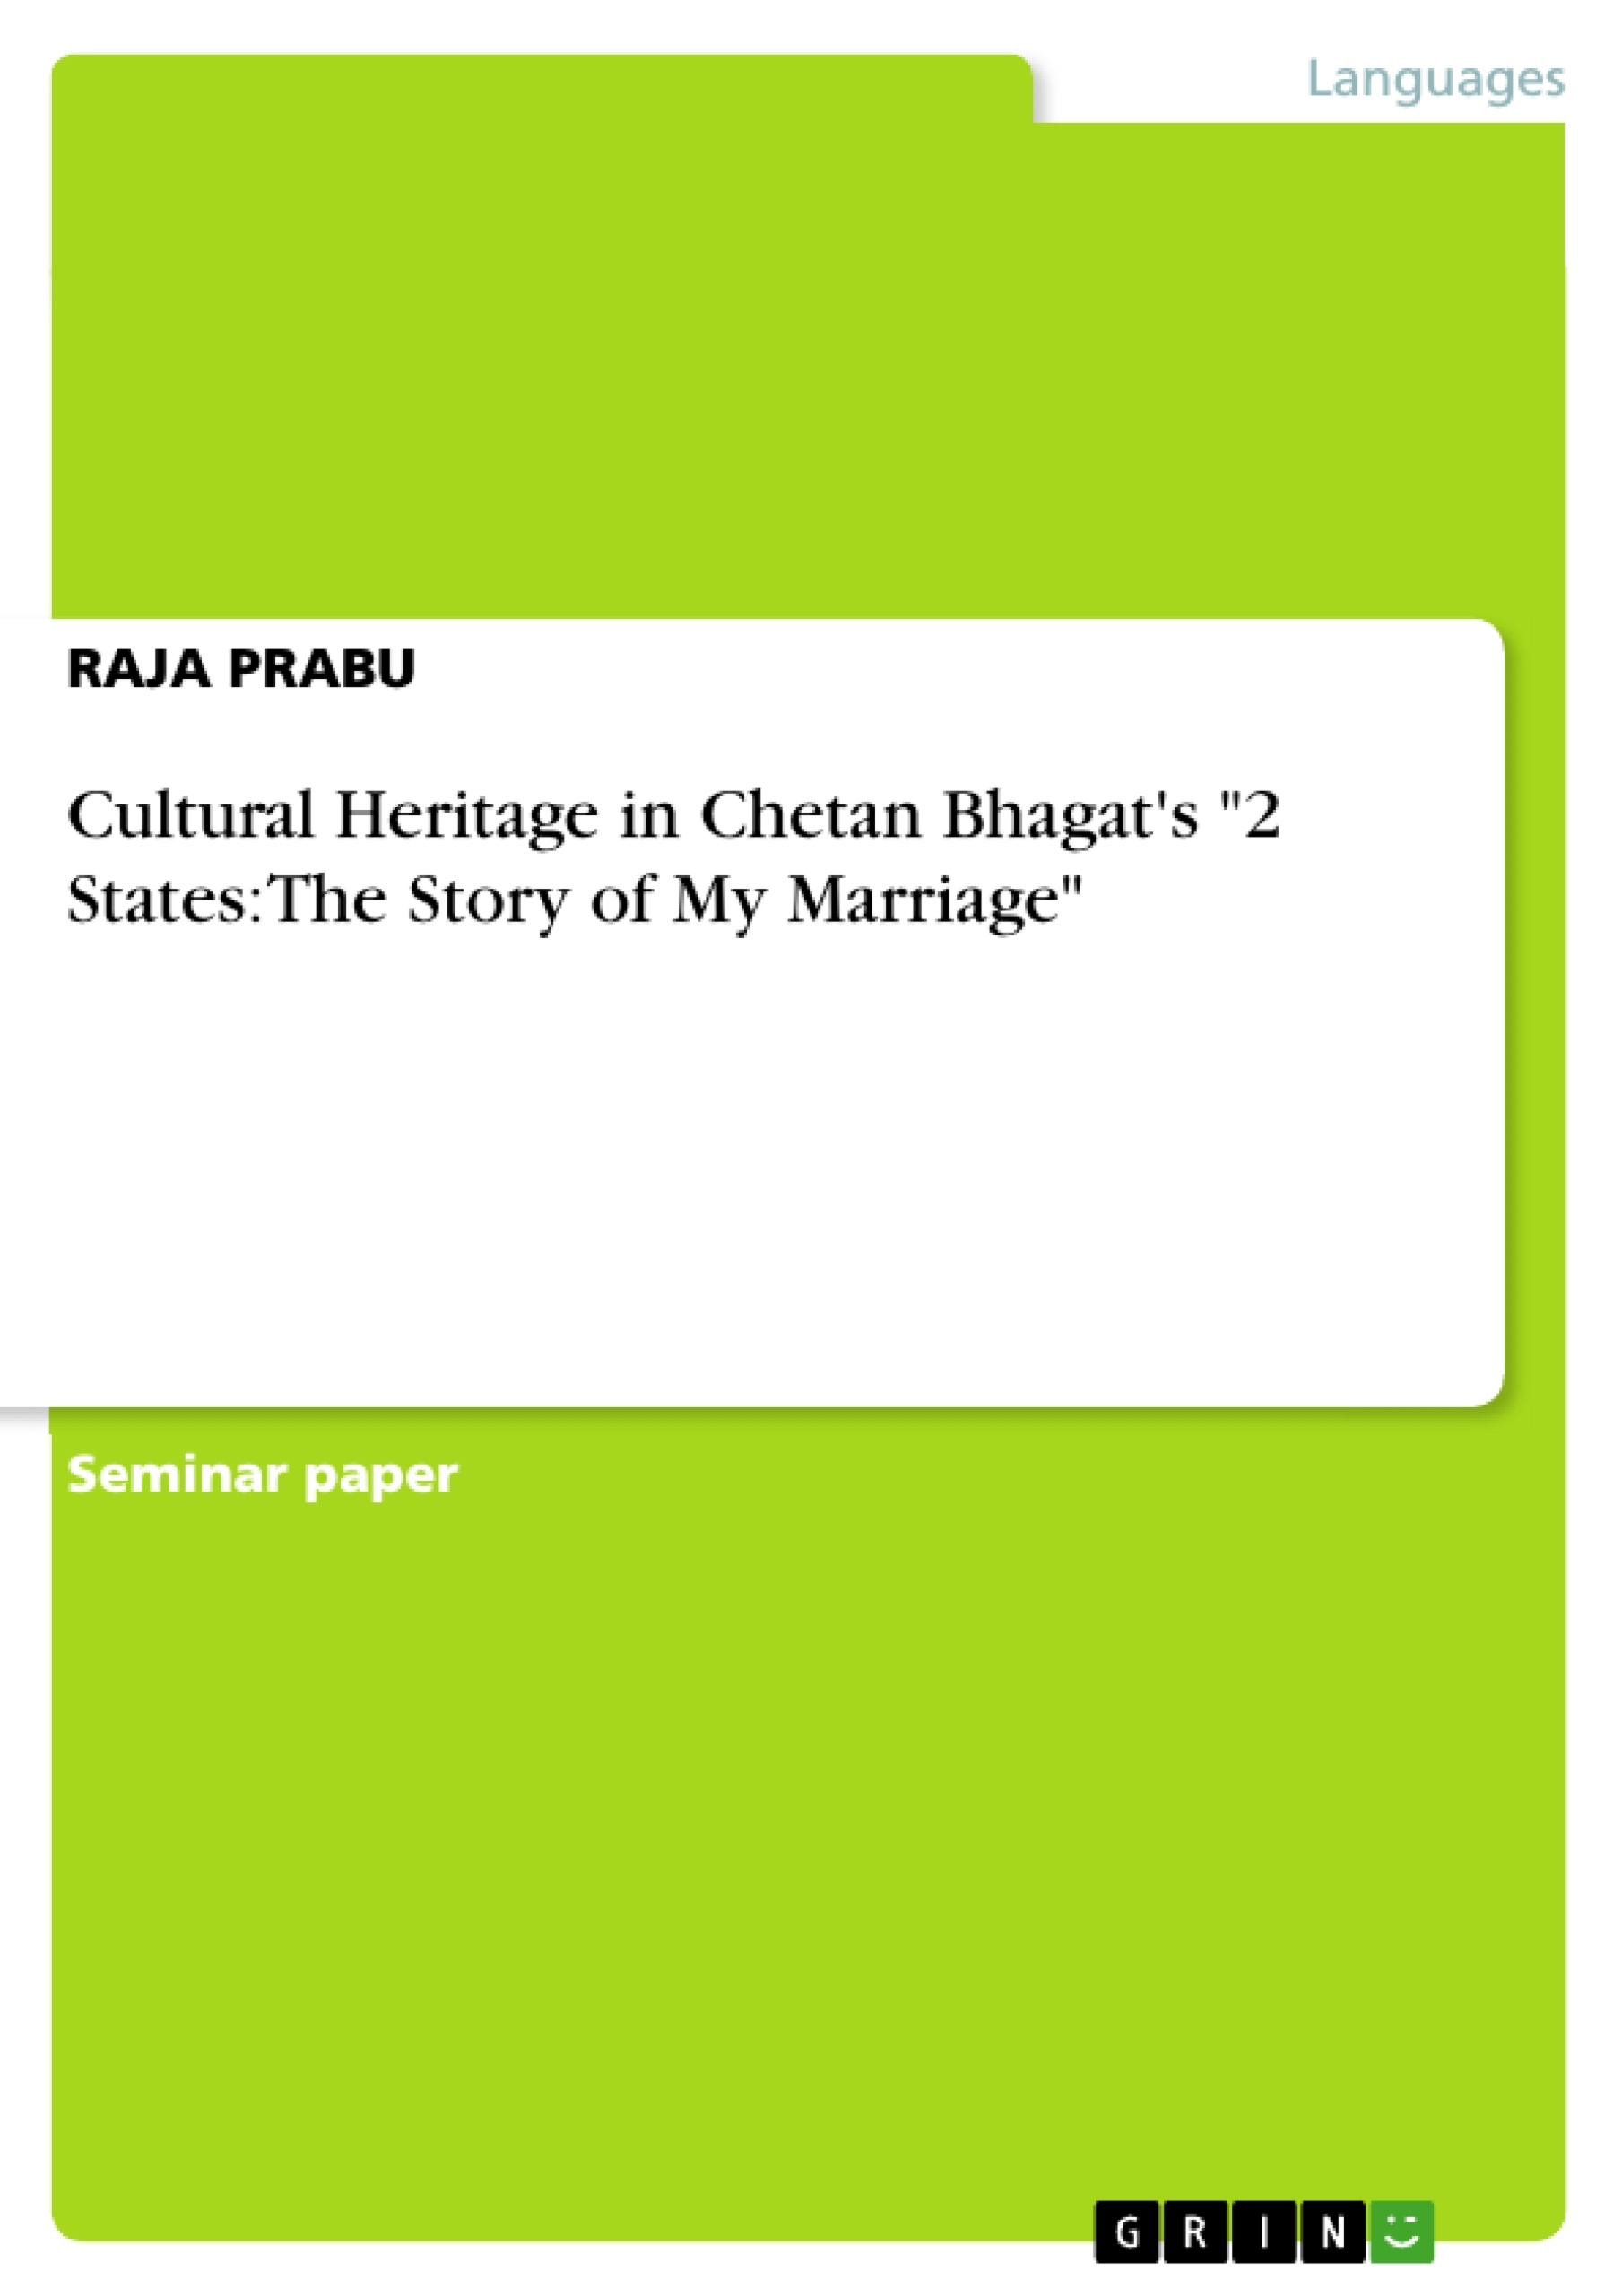 Title: Cultural Heritage in Chetan Bhagat's "2 States: The Story of My Marriage"